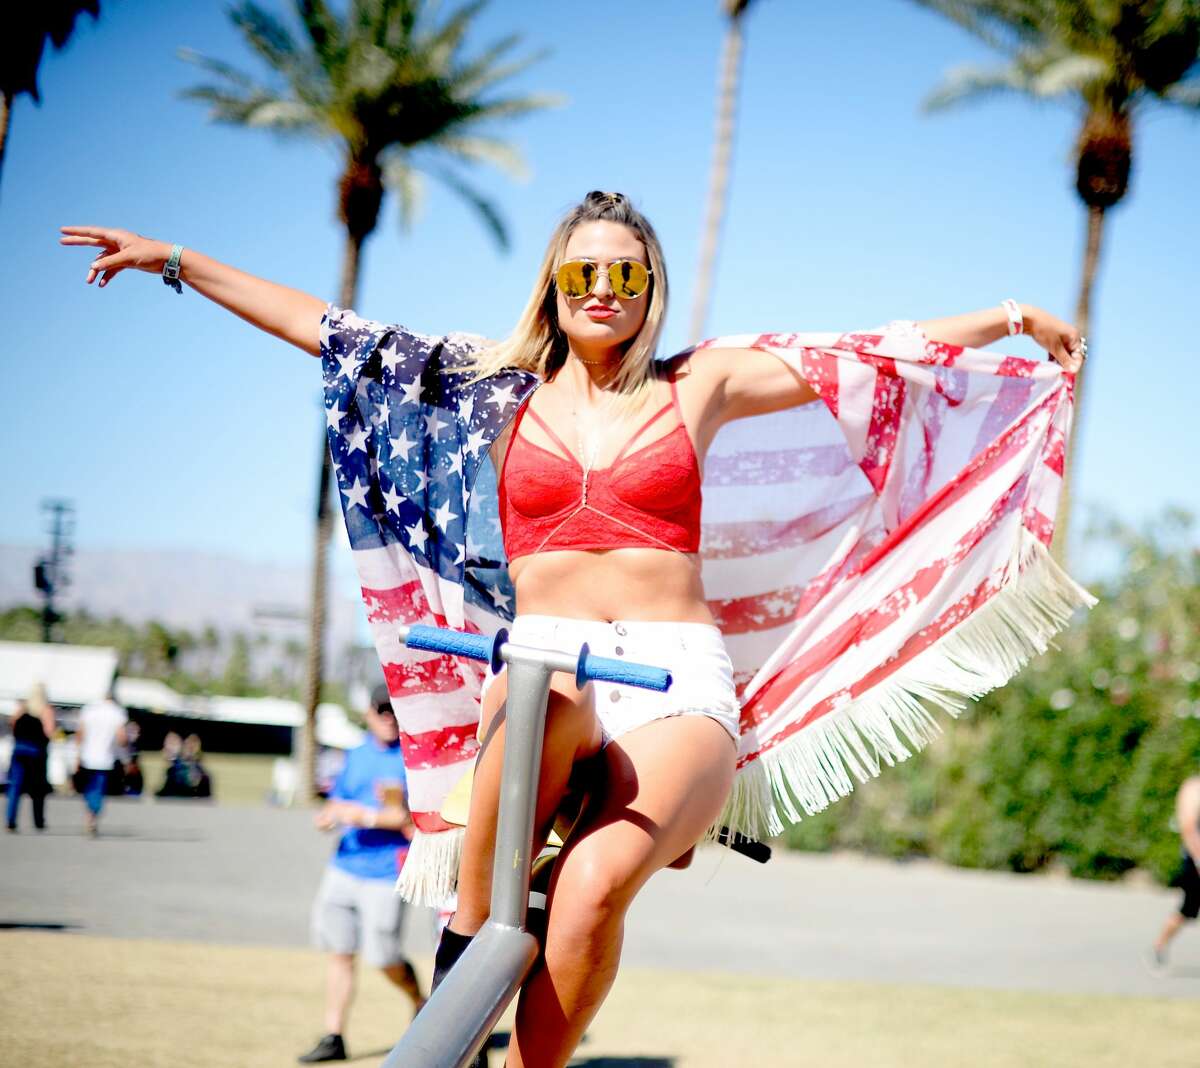 This flag shawl protects sunburns and freedom.